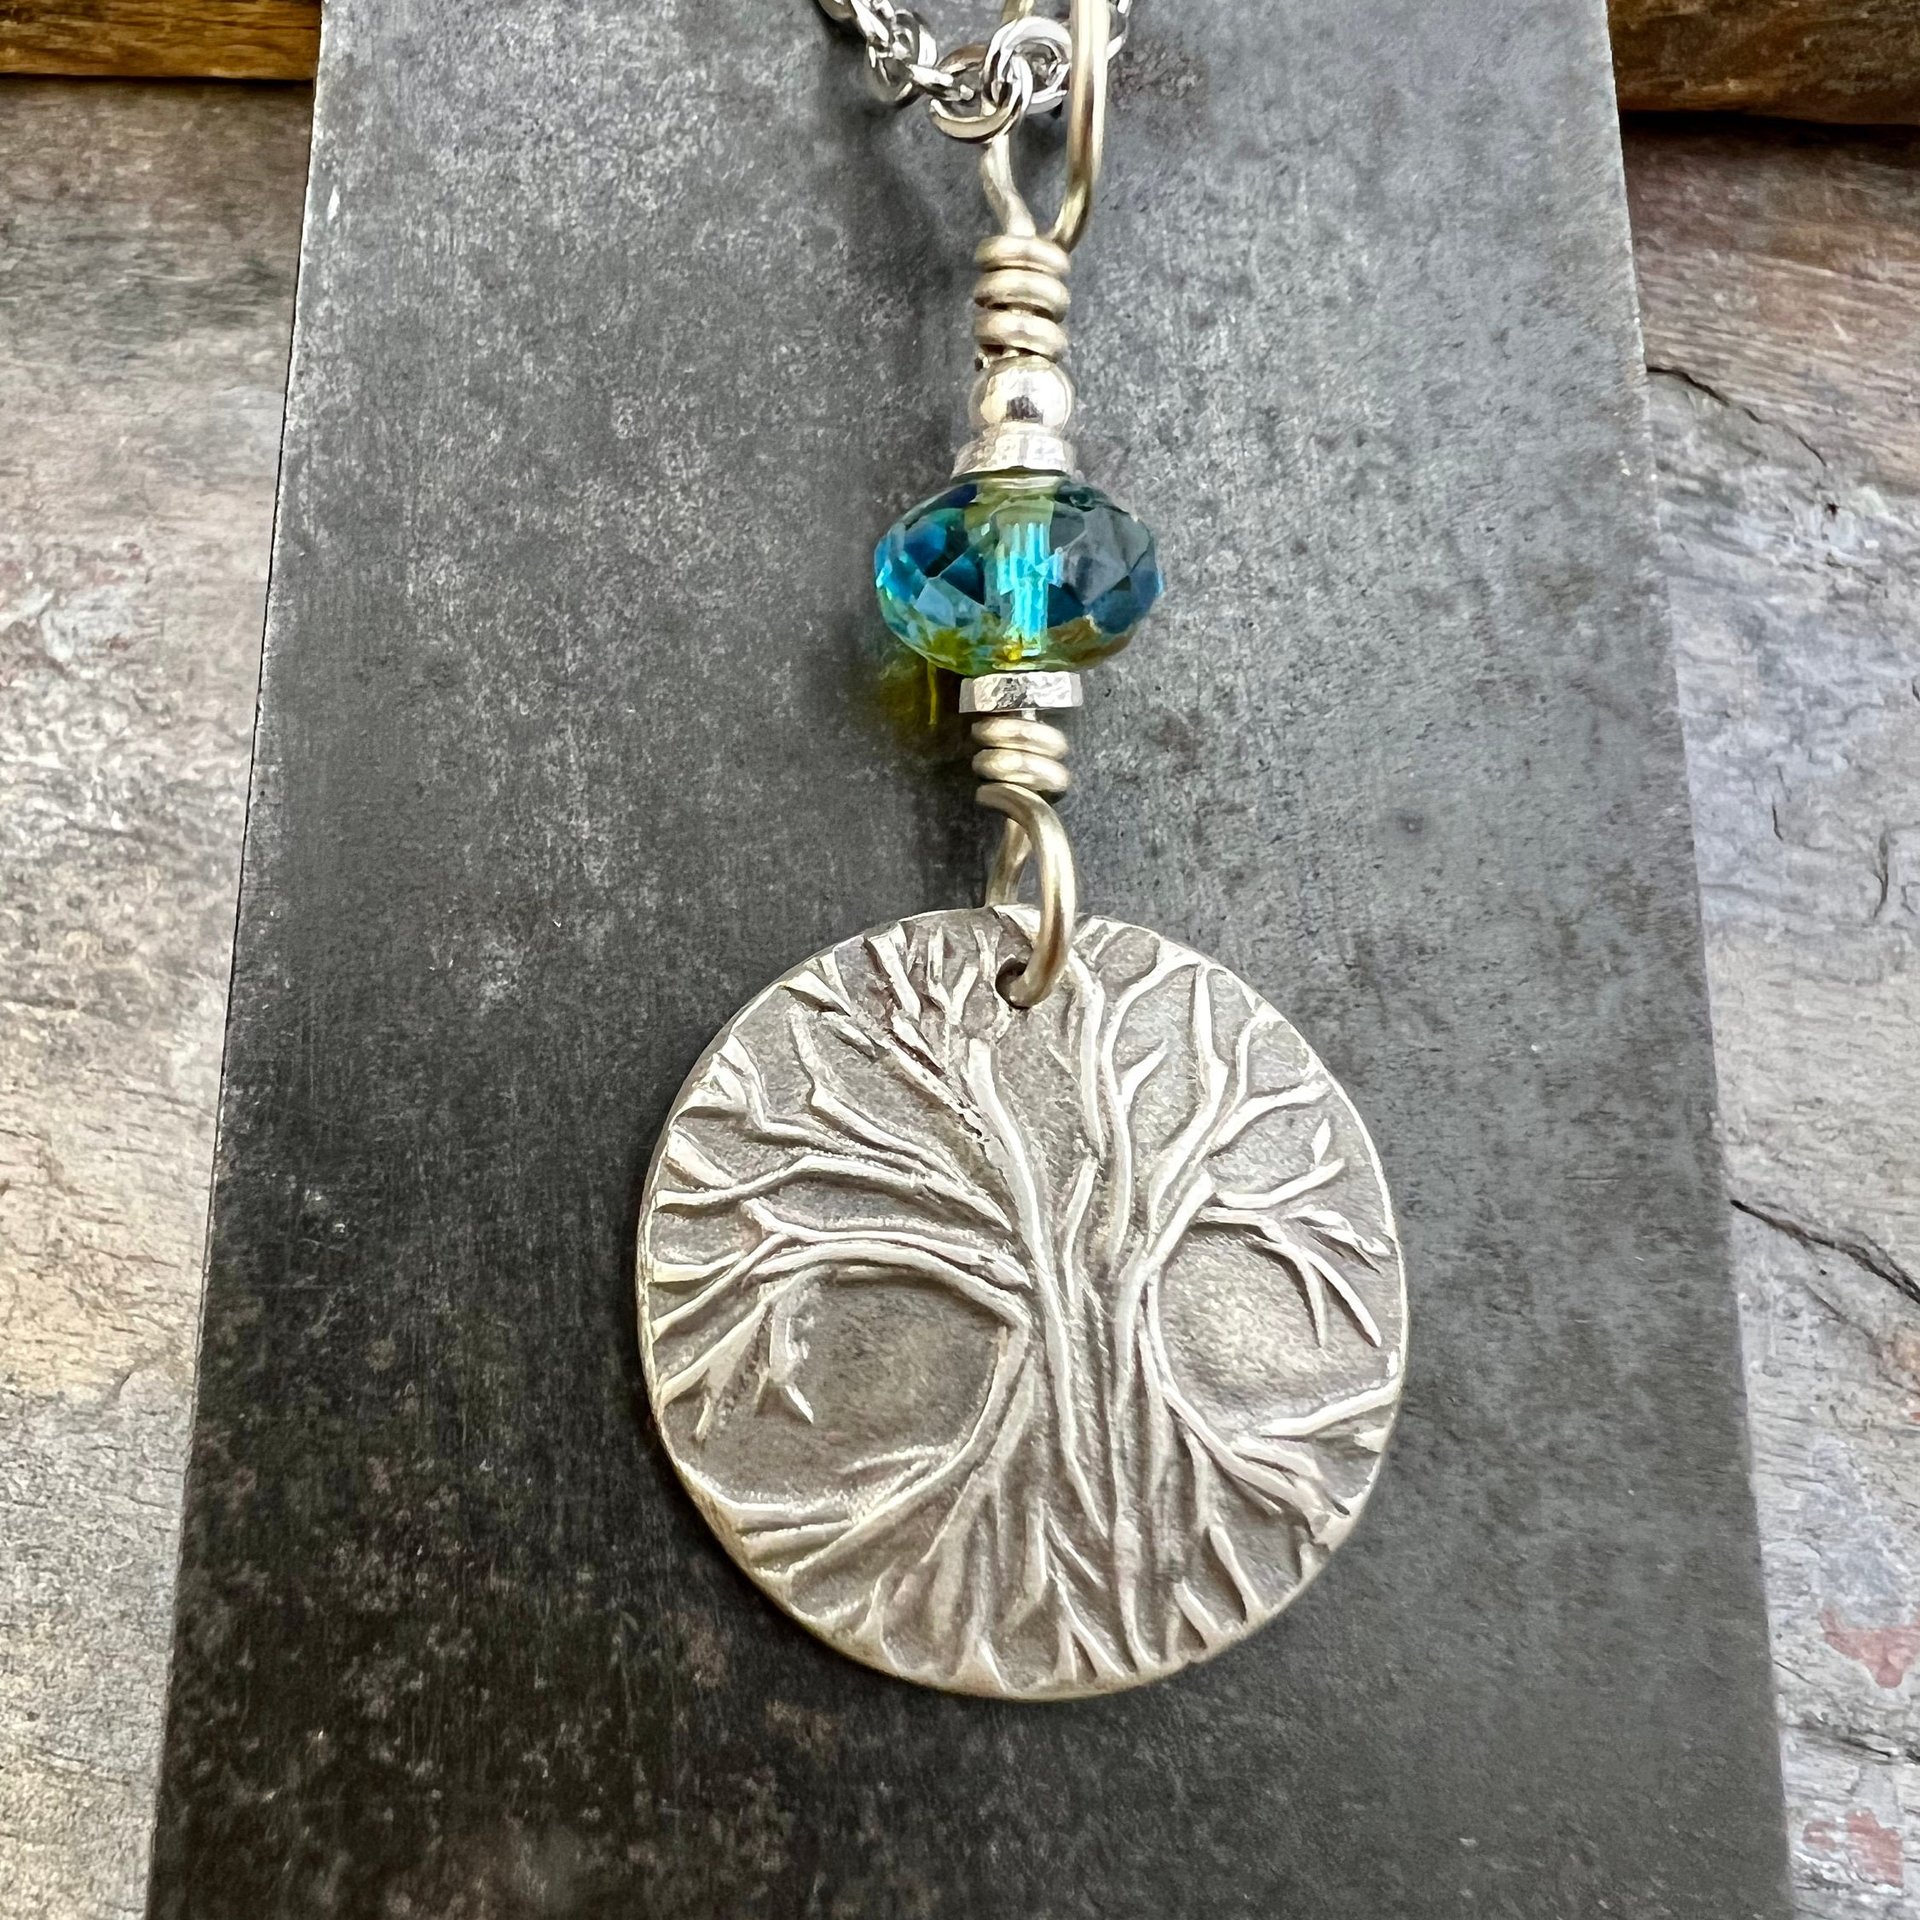 Tree of Life, Sterling Silver Charm, Czech Glass, Silver Tree Necklace, Leather & Vegan Cords, Stainless Steel Chain, Earthy Nature Gifts